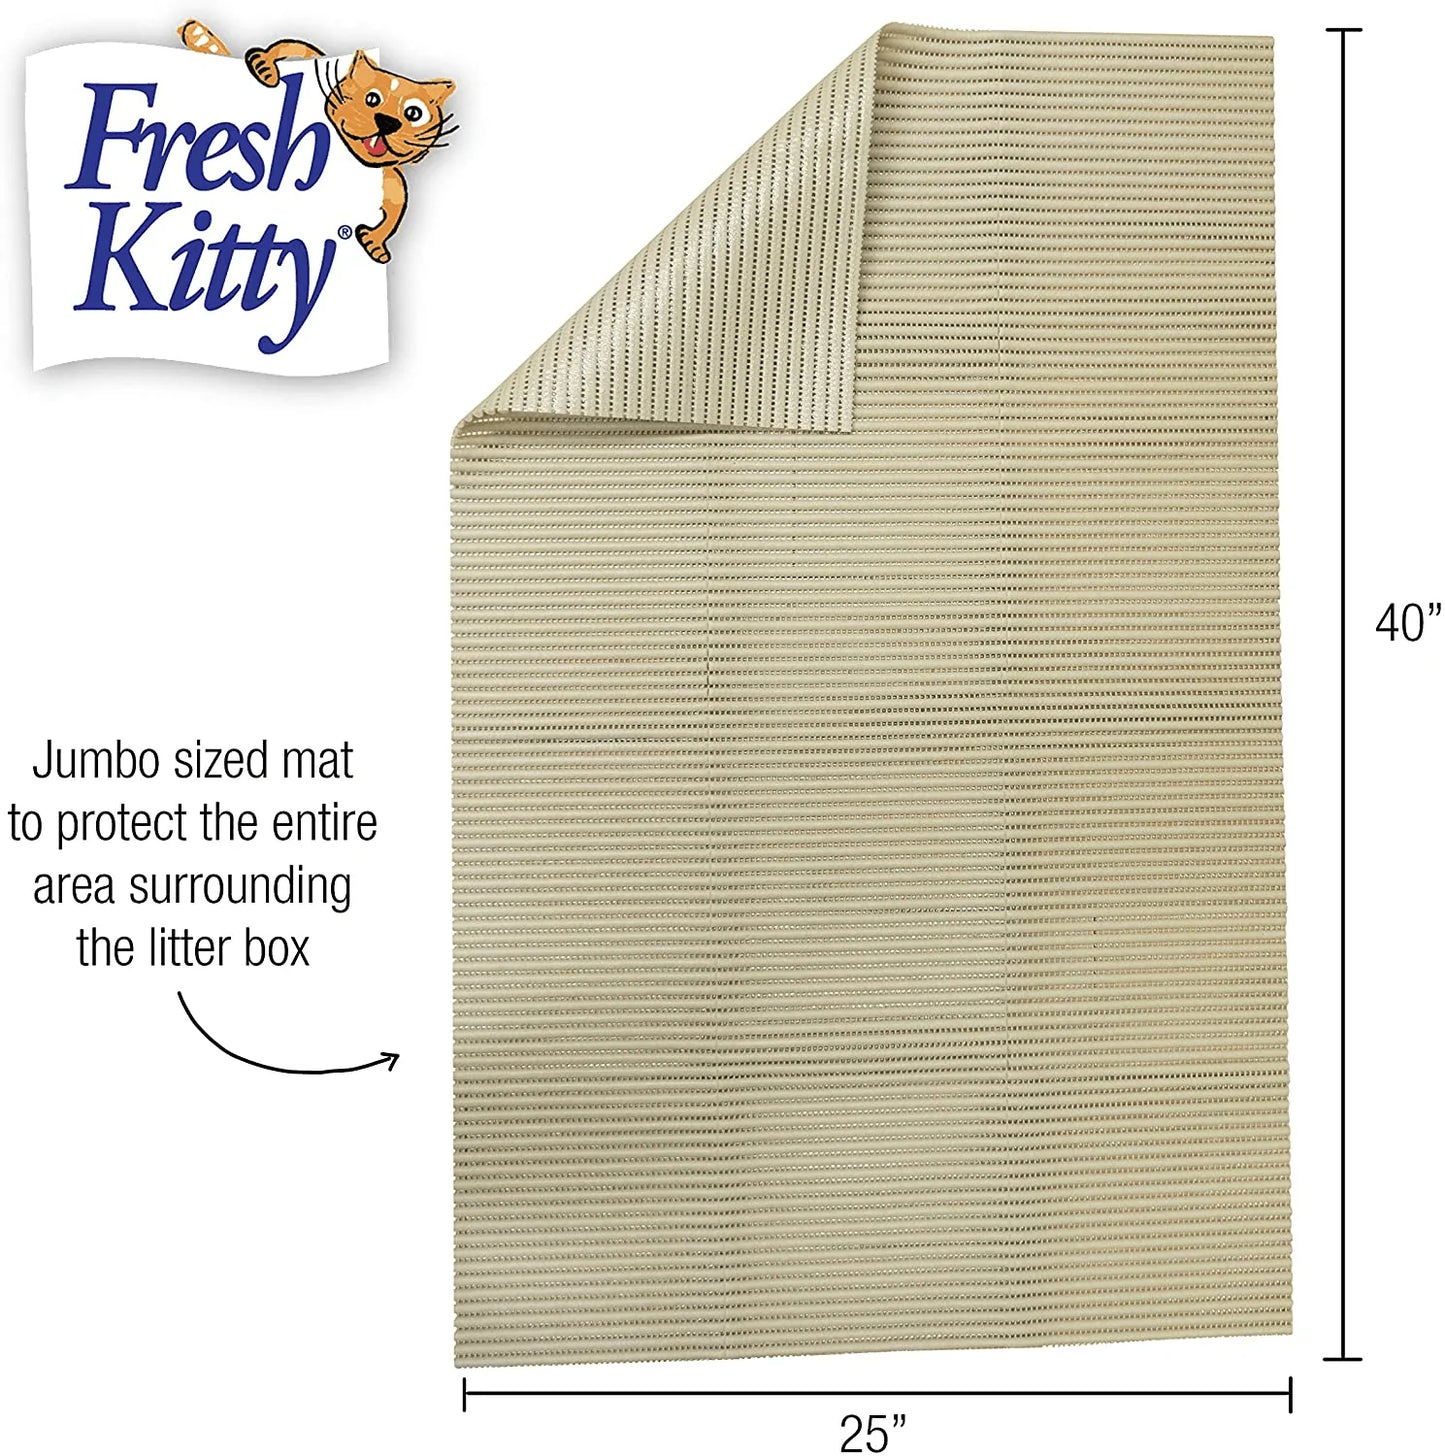 Fresh Kitty Durable XL Jumbo Foam Litter Mat – BPA and Phthalate Free, Water Resistant, Traps Litter from Box, Scatter Control, Easy Clean Mats 40"X25" (9027)